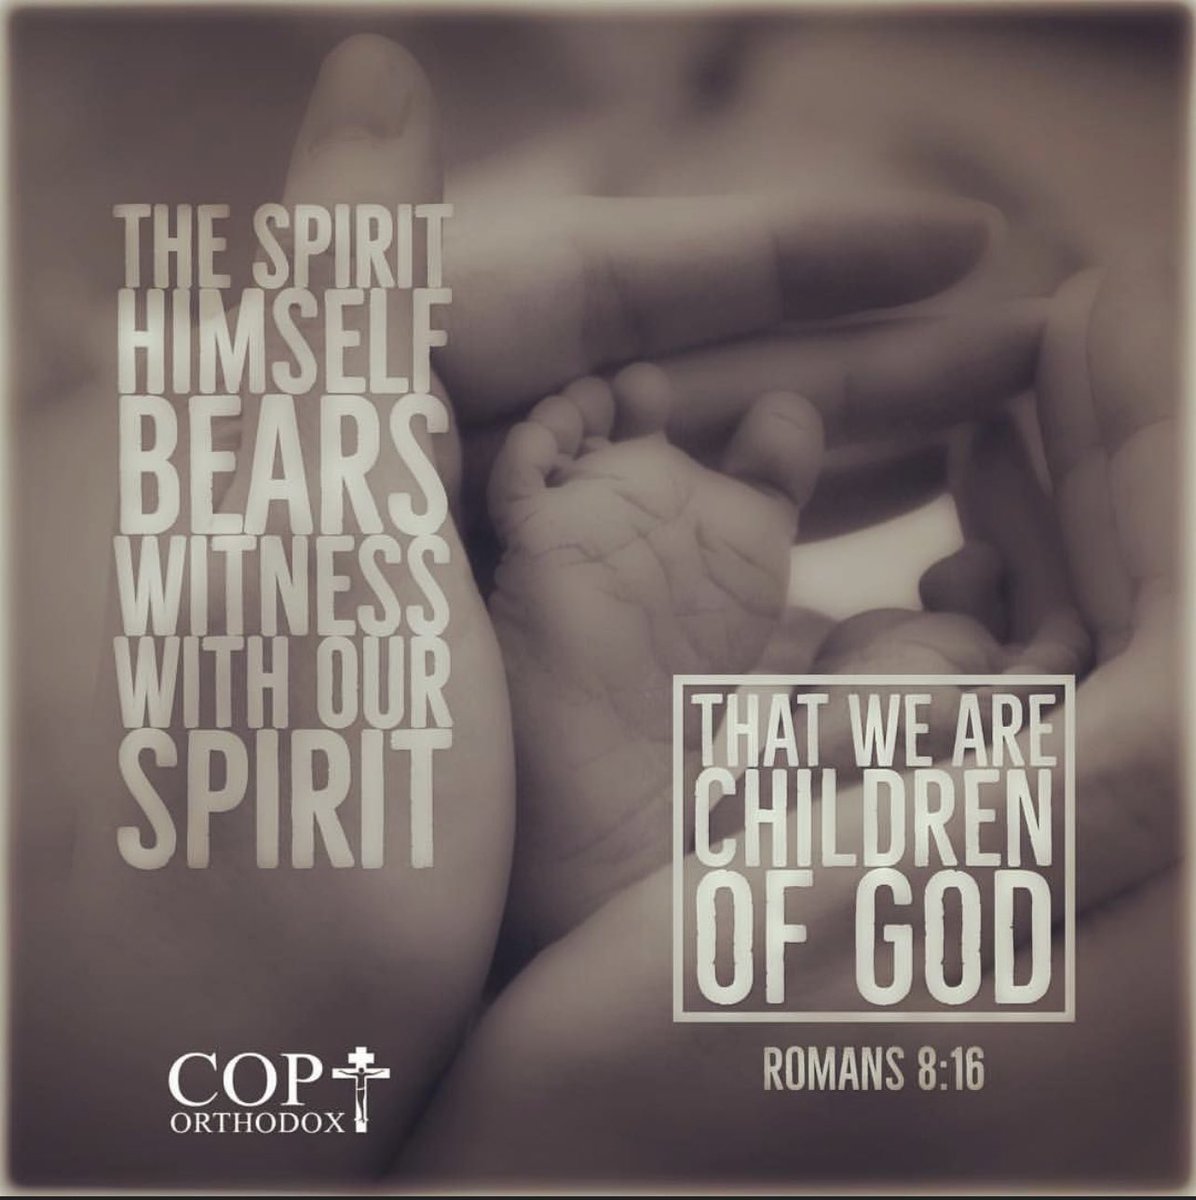 #HolySpirit #Christians Romans 8:16-17 KJV The Spirit itself beareth witness with our spirit, that we are the children of God: And if children, then heirs; heirs of God, and joint-heirs with Christ; if so be that we suffer with him, that we may be also glorified together.